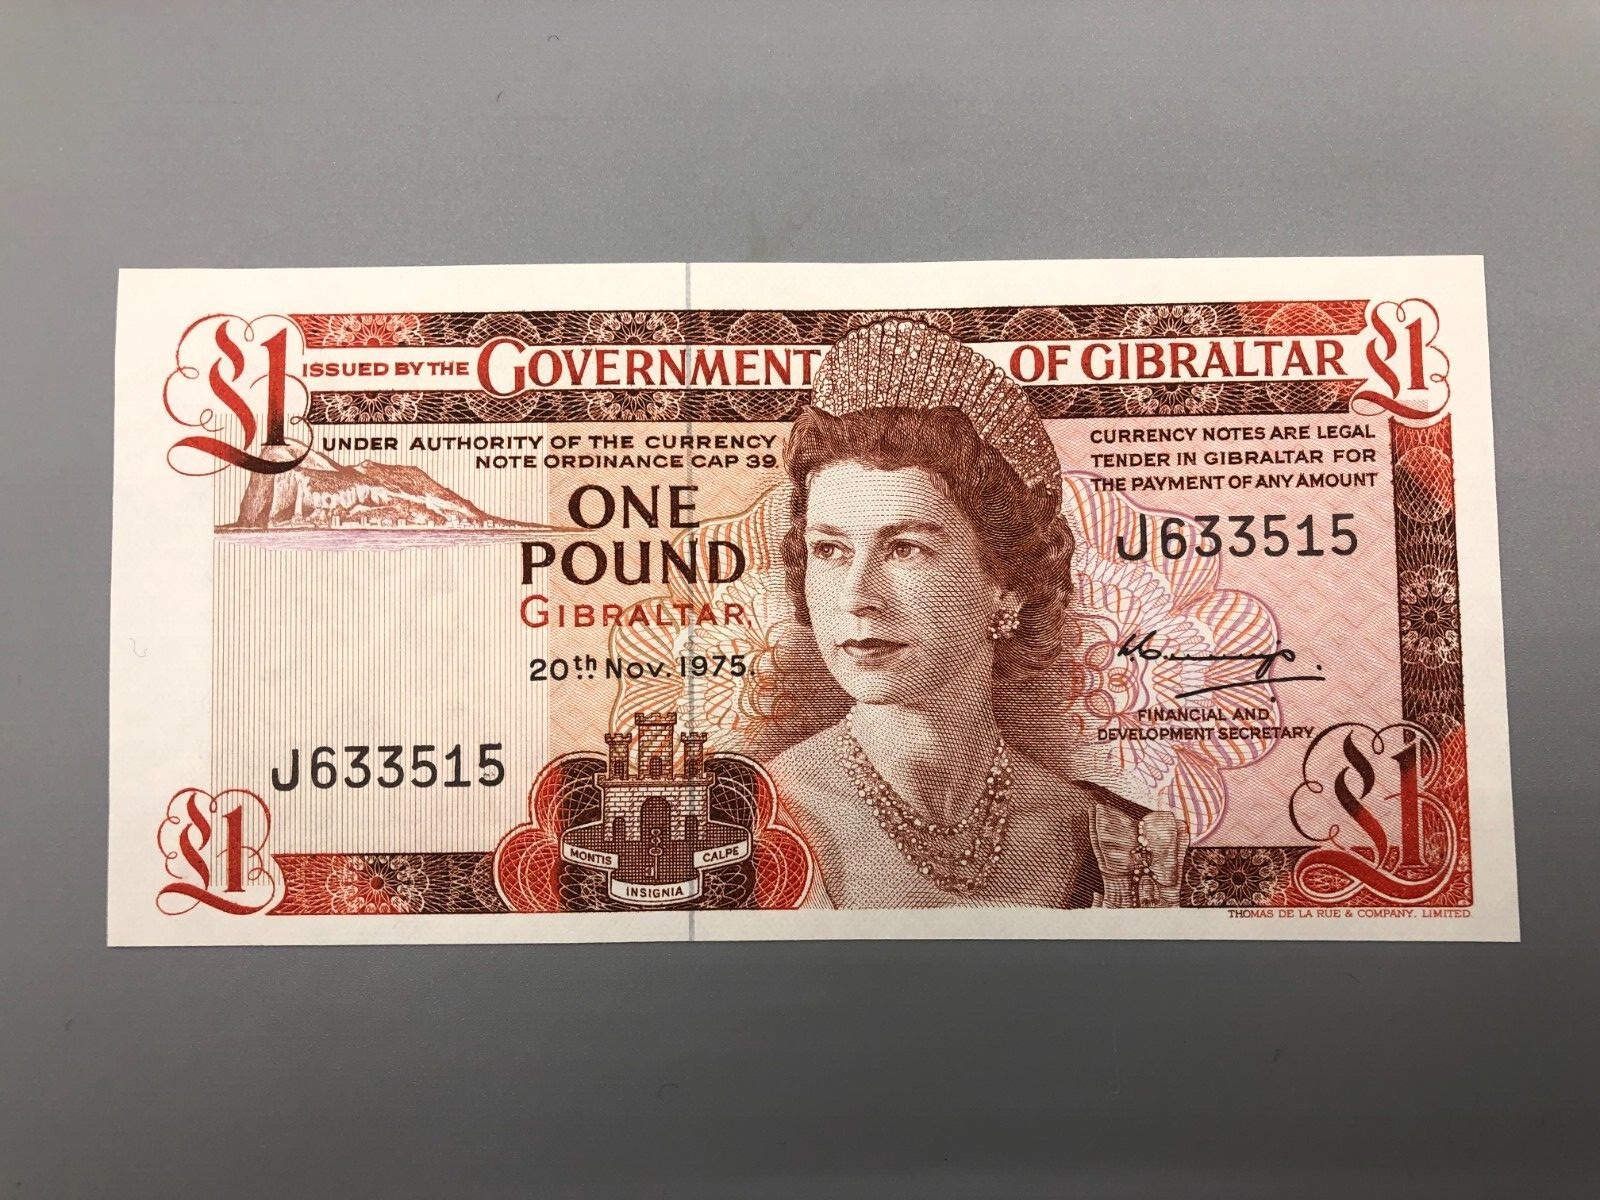 EP18: £1 (POUND) CURRENCY NOTE / FOREIGN CURRENCY / MINT CONDITION